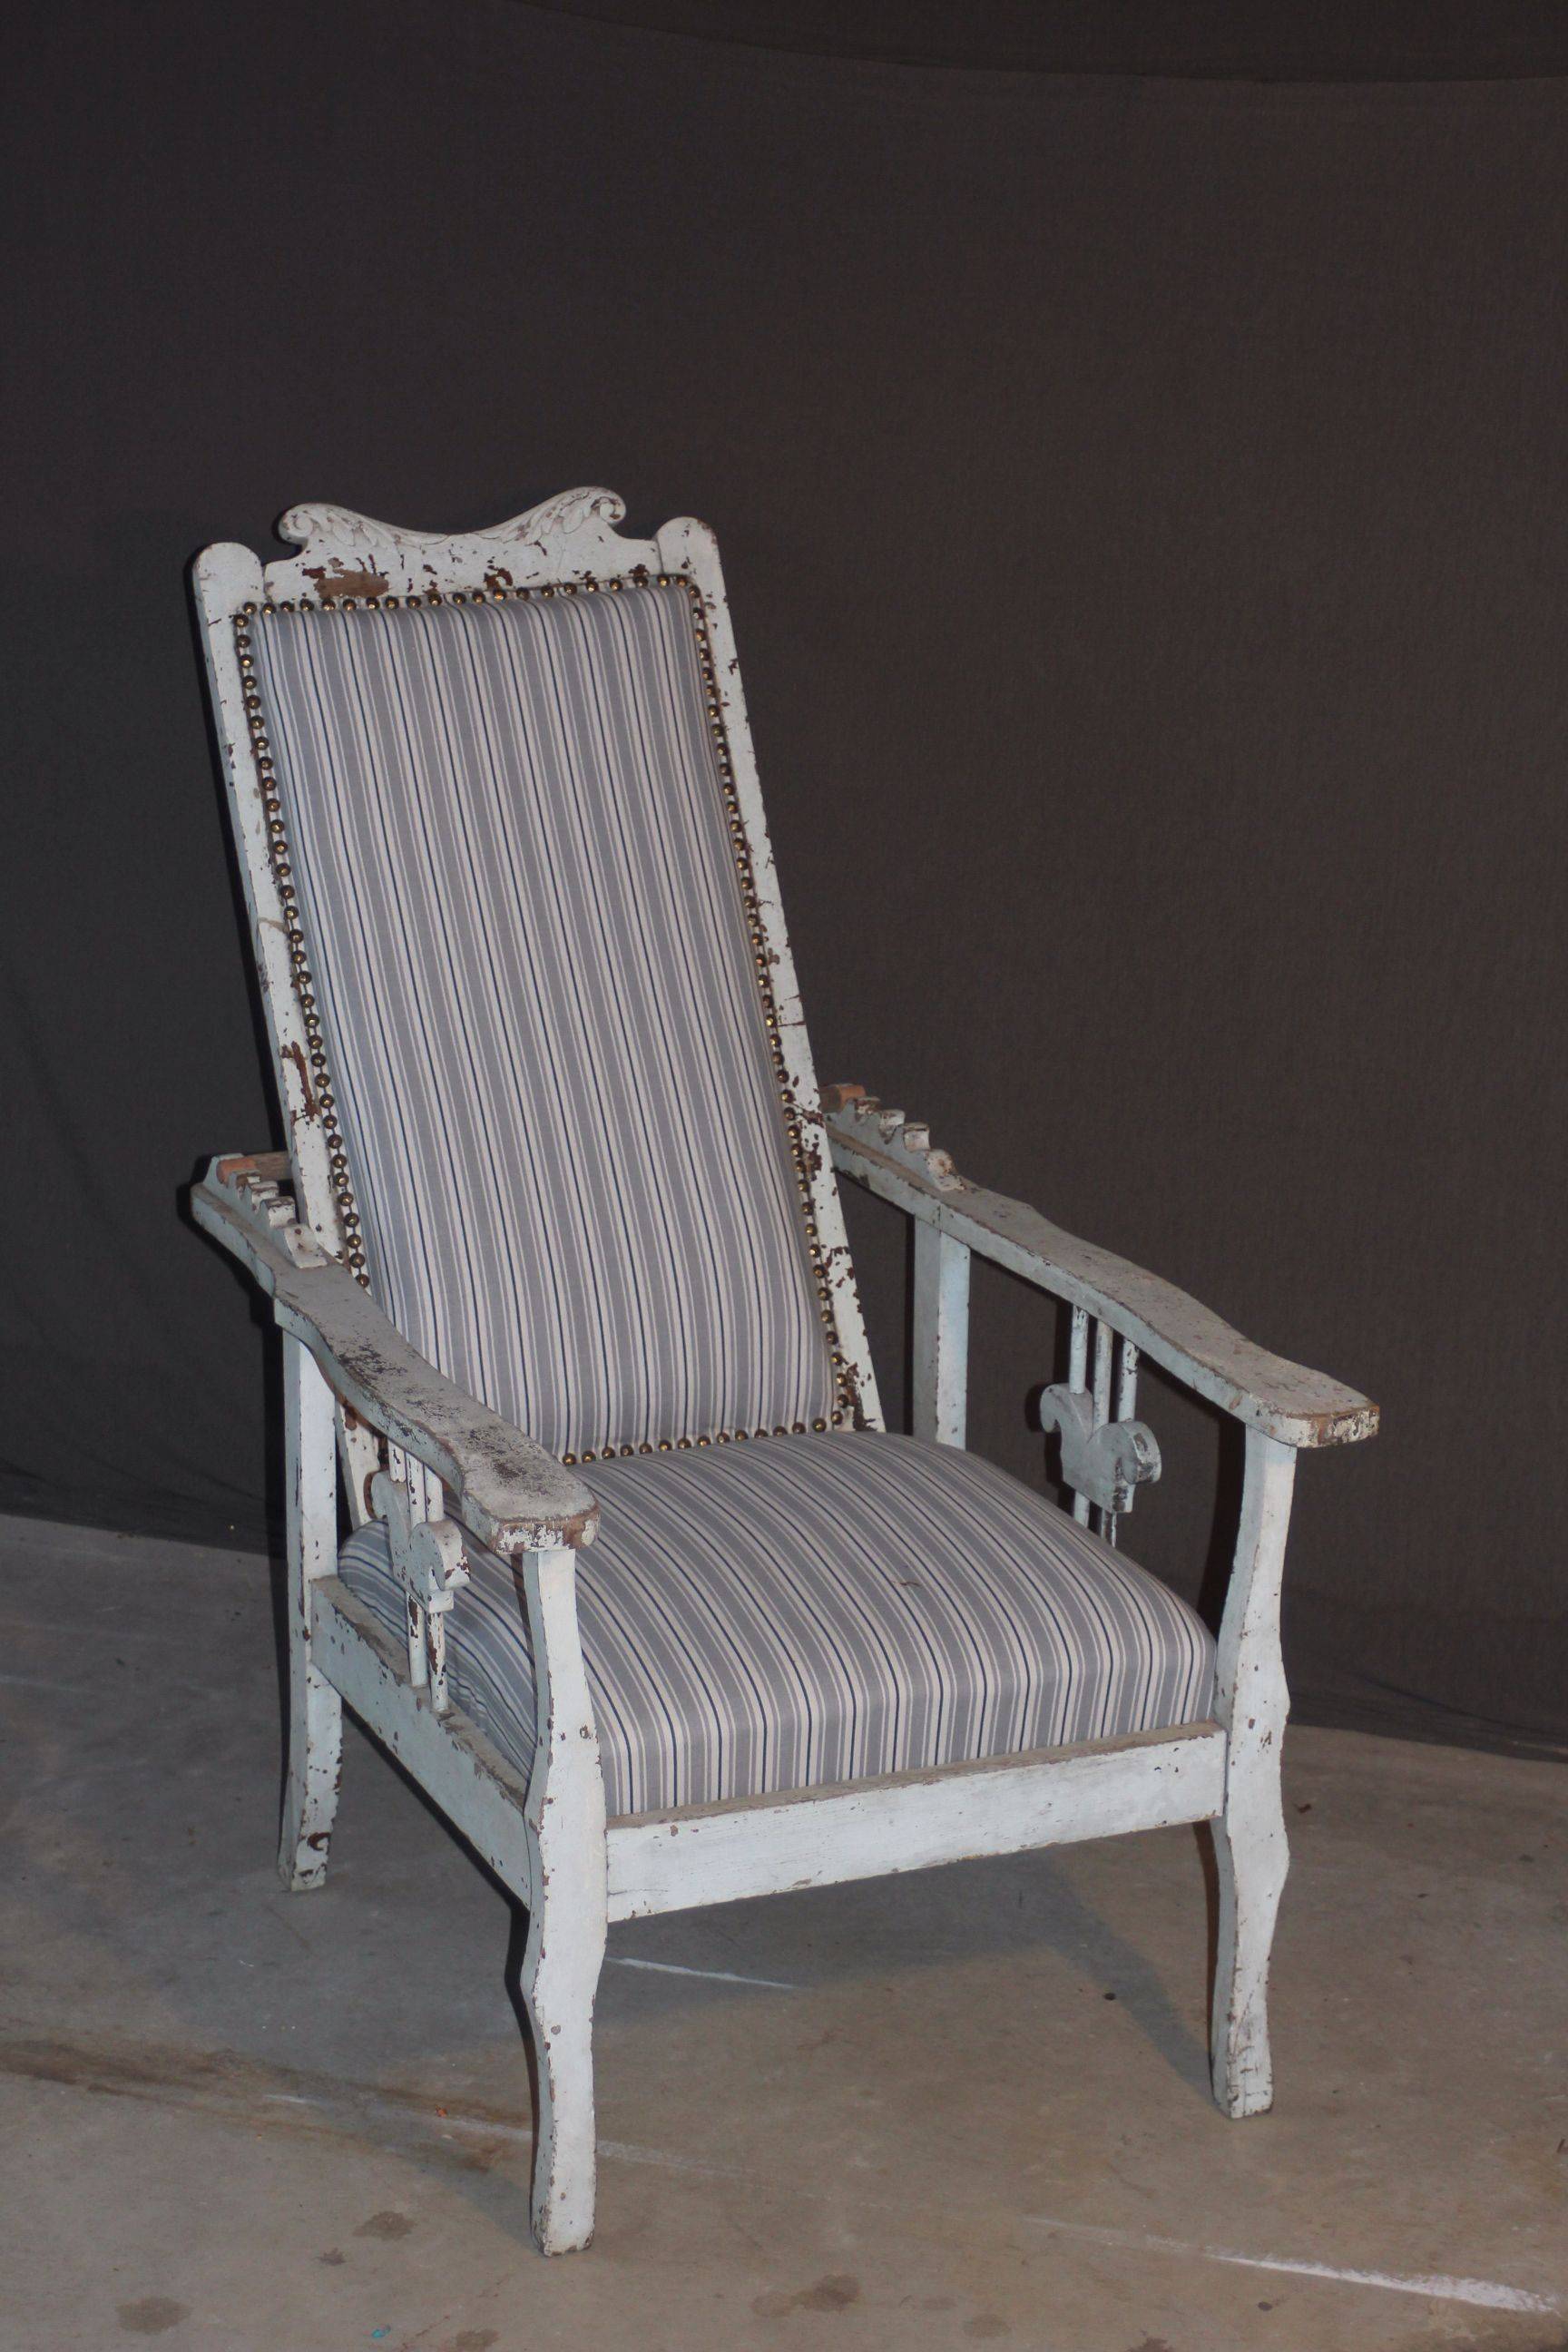 Patio Chair Favorites New Designs